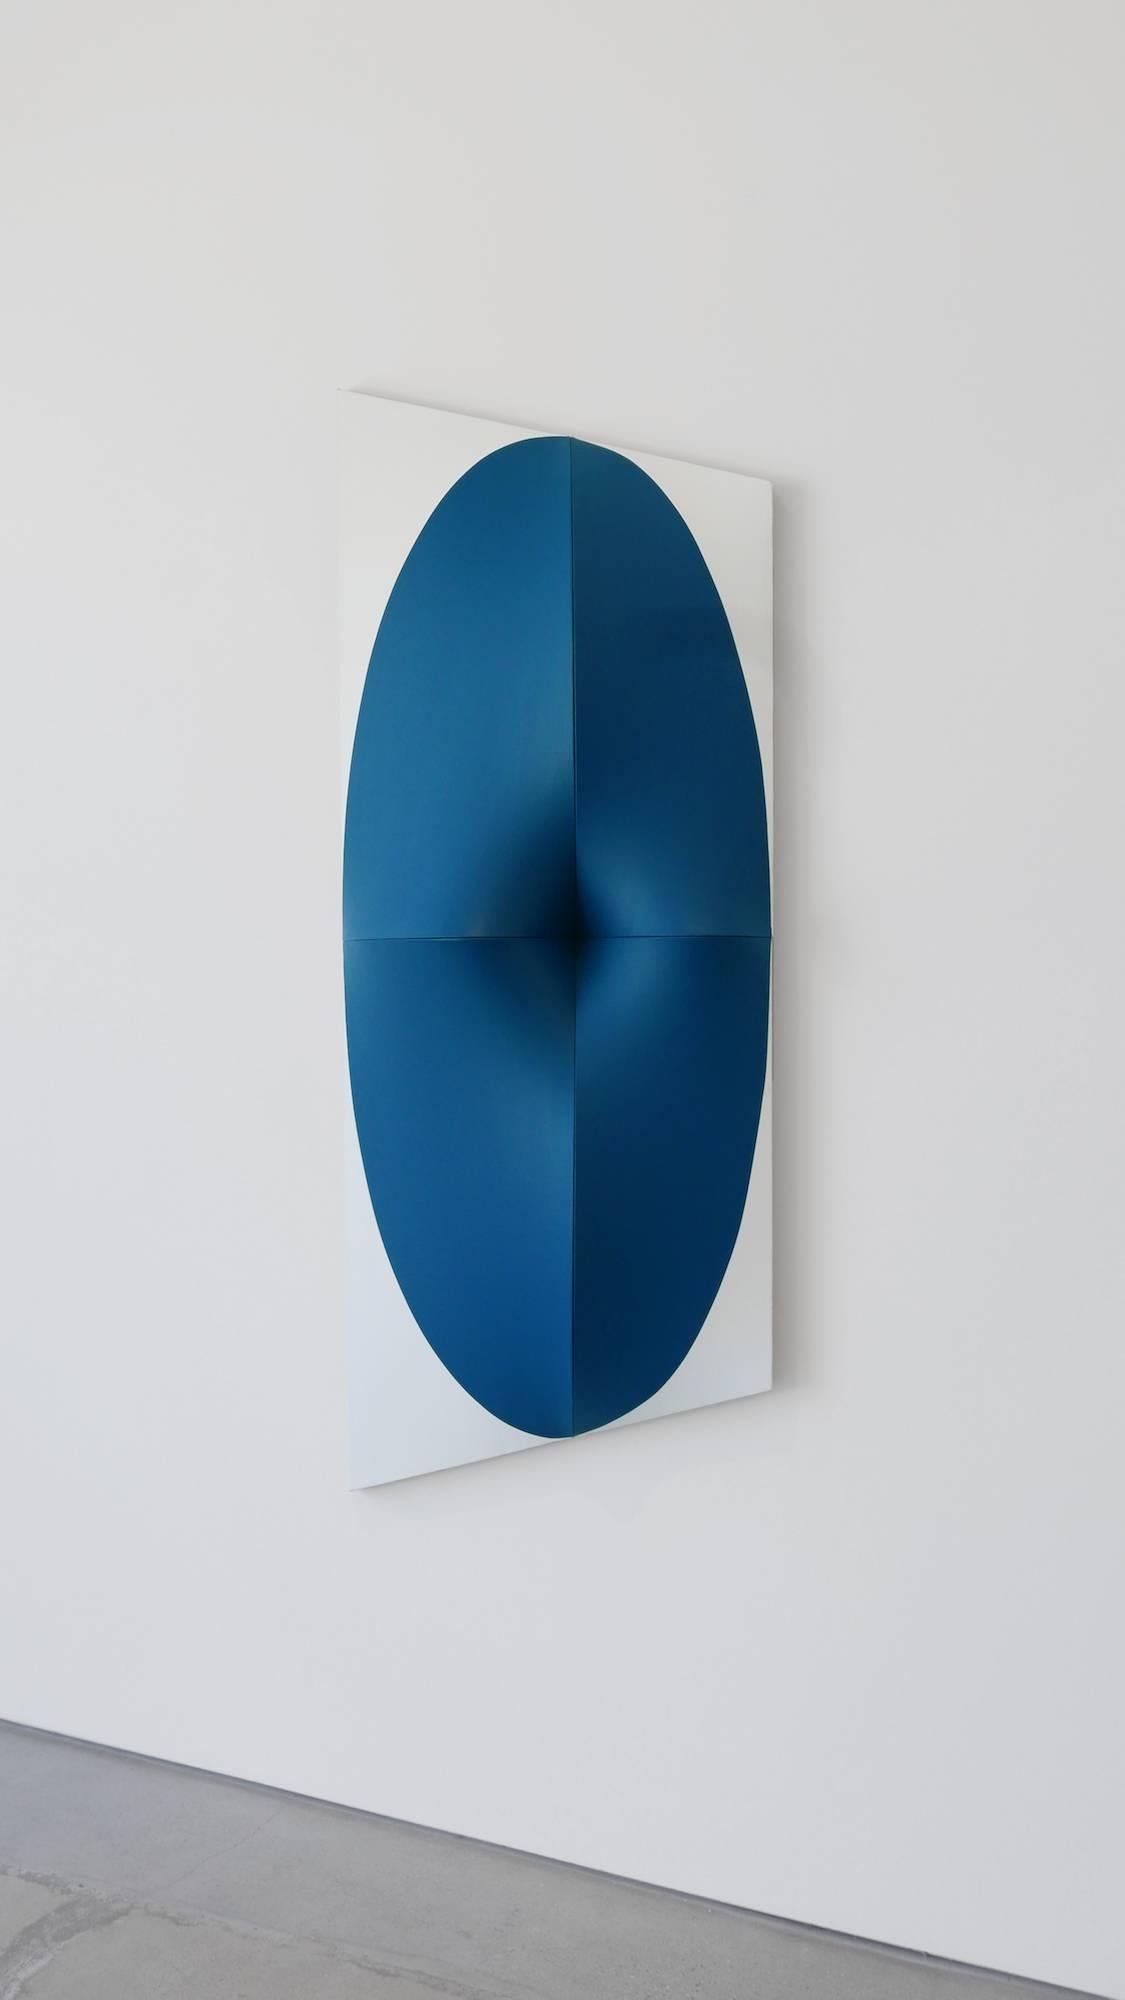 Pointing Inside in Perspective - Minimalist Painting by Jan Maarten Voskuil